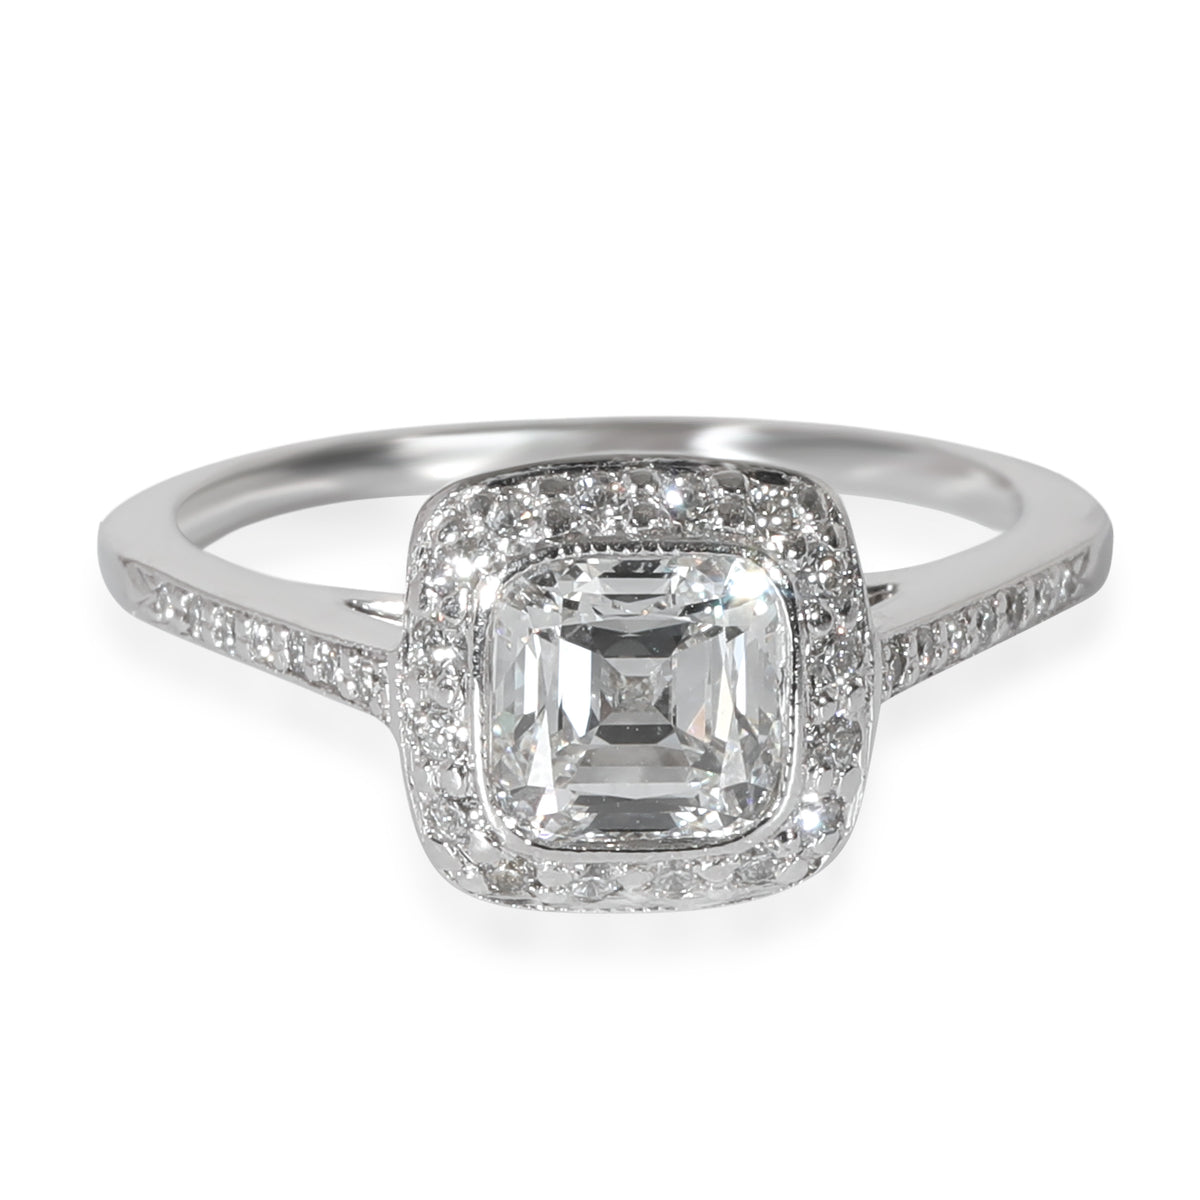 Tiffany & Co. Legacy Engagement Ring  in  Platinum F VVS2 1.07 CTW